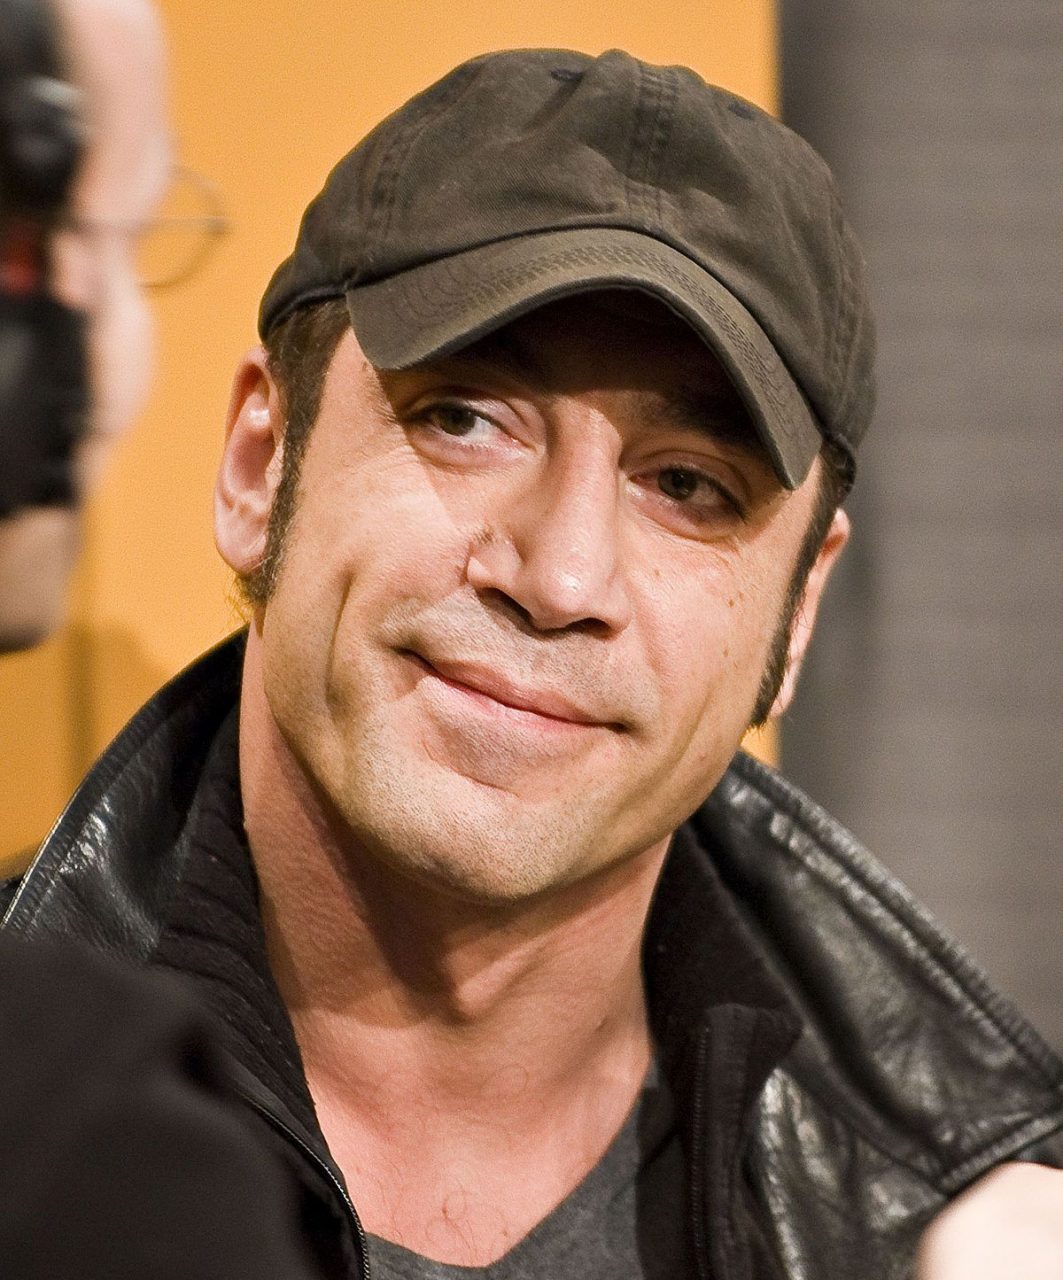 Image Of Javier Bardem With Cap